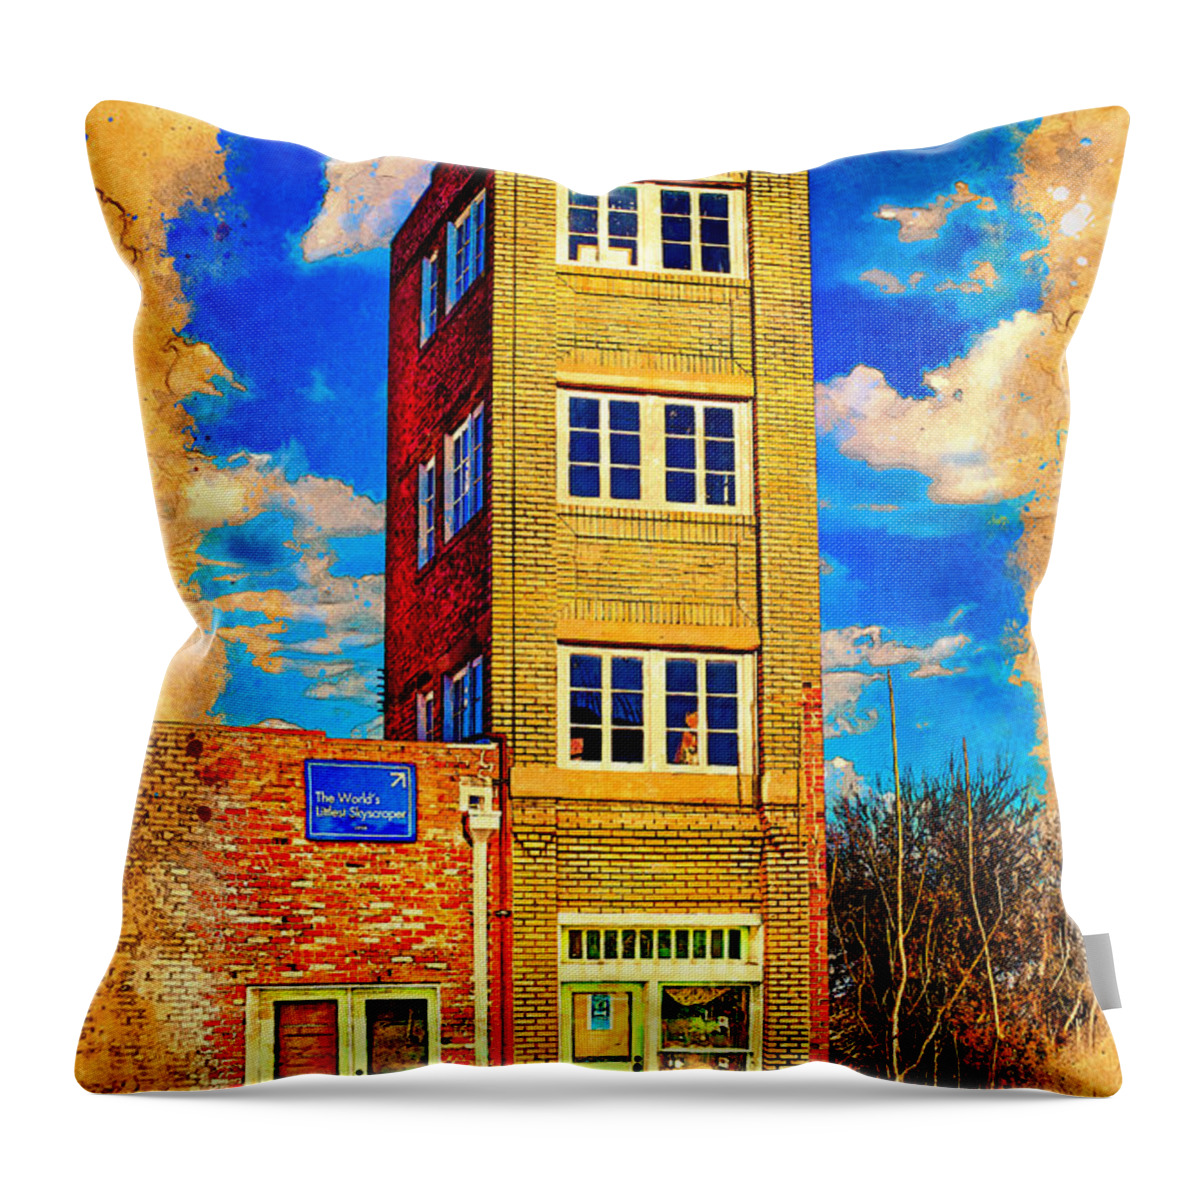 World's Littlest Skyscraper Throw Pillow featuring the digital art World's littlest skyscraper, The Newby-McMahon Building, in Wichita Falls - digital painting by Nicko Prints